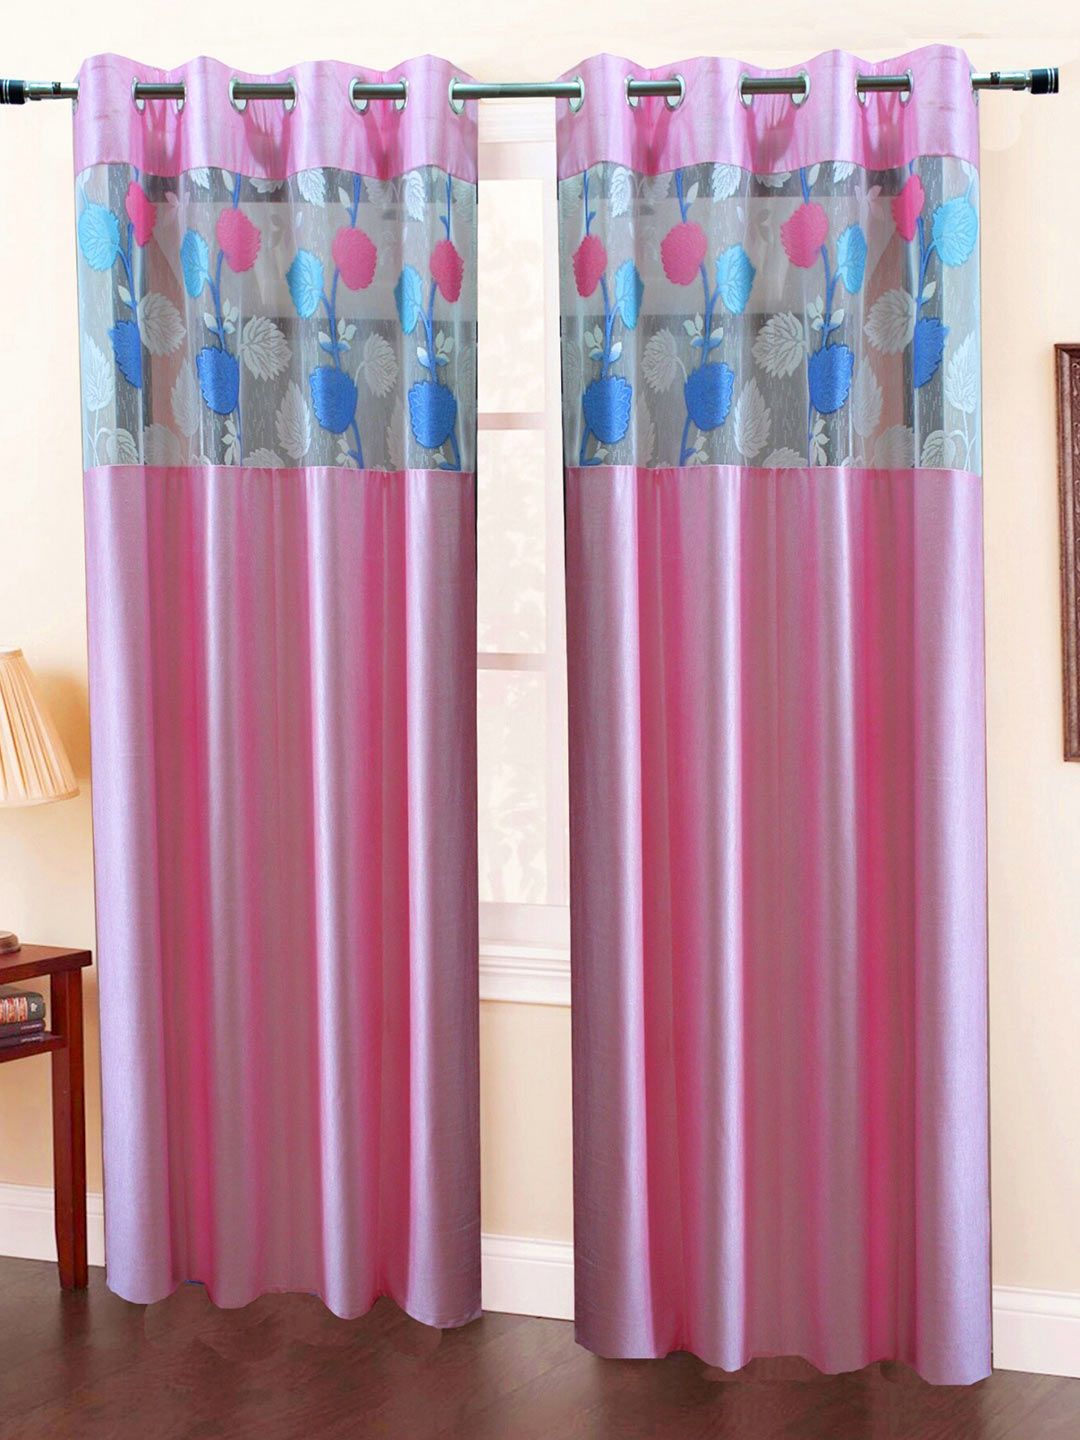 Homefab India Pink & White Set of 2 Sheer Door Curtain Price in India